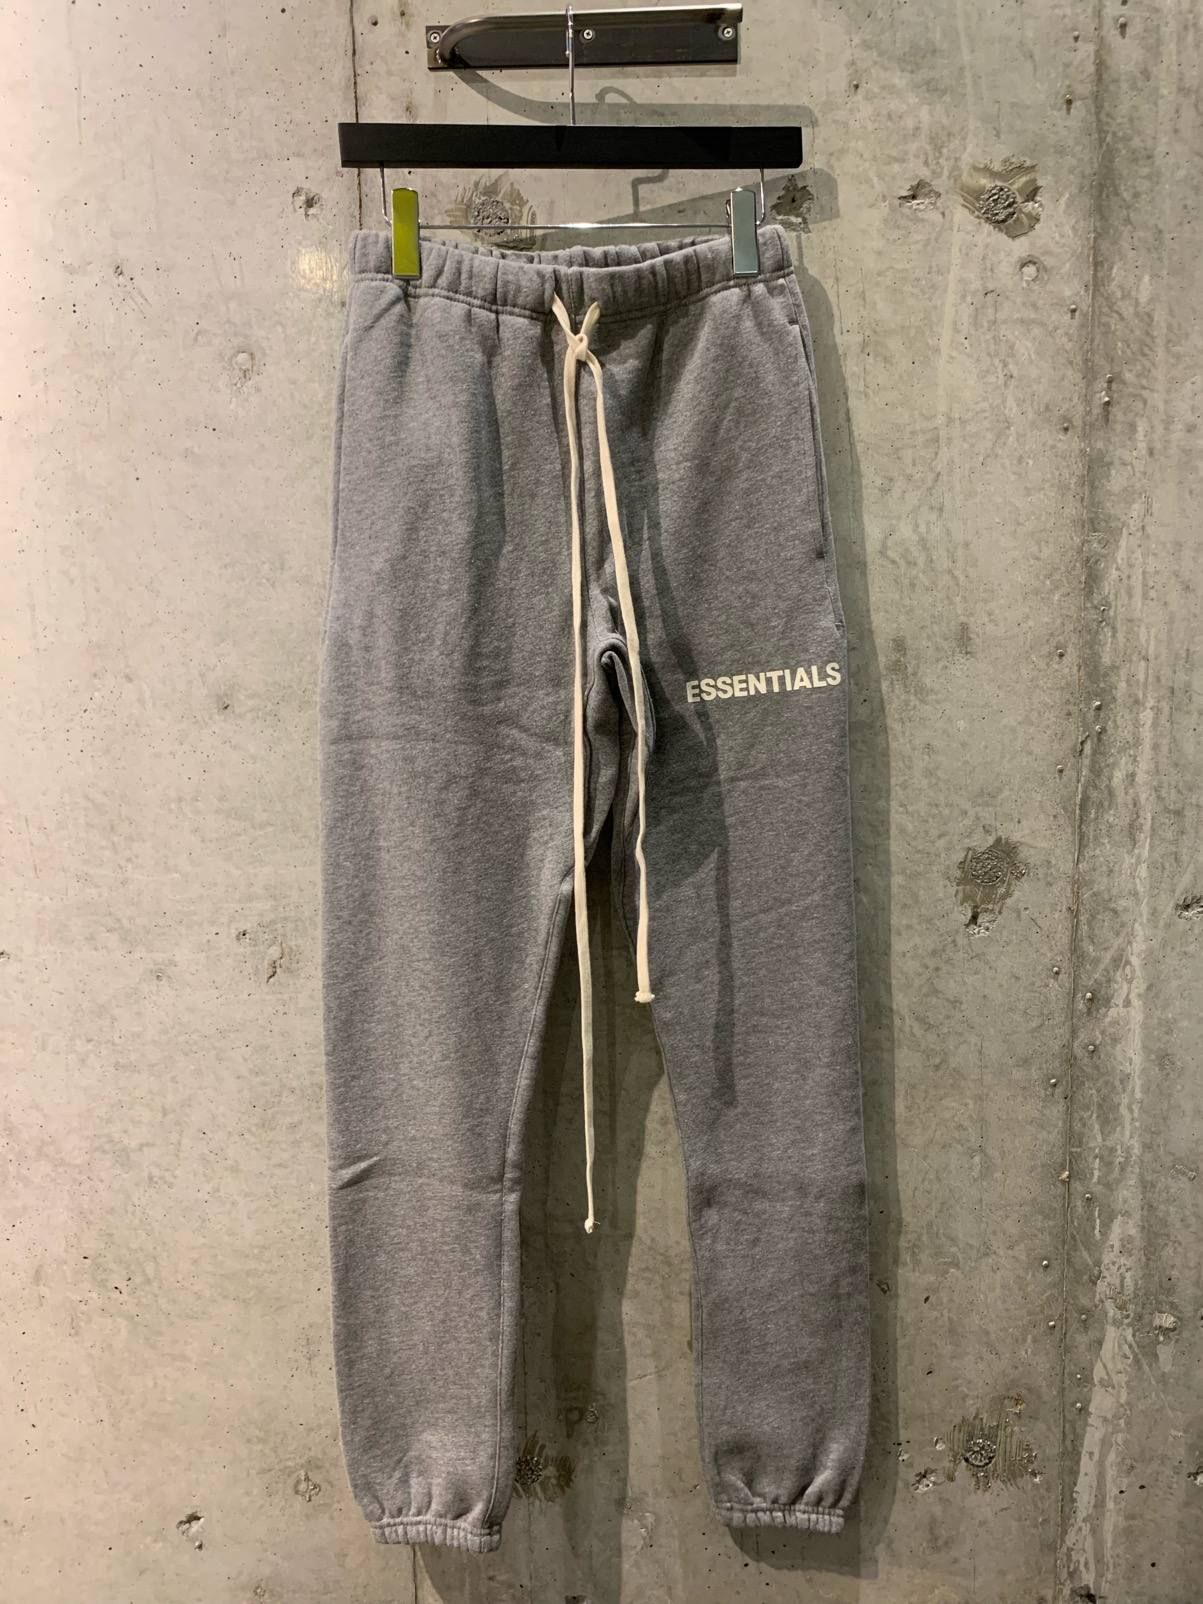 FOG ESSENTIALS - FOG essentials SWEATPANTS(グレー) | R and another ...